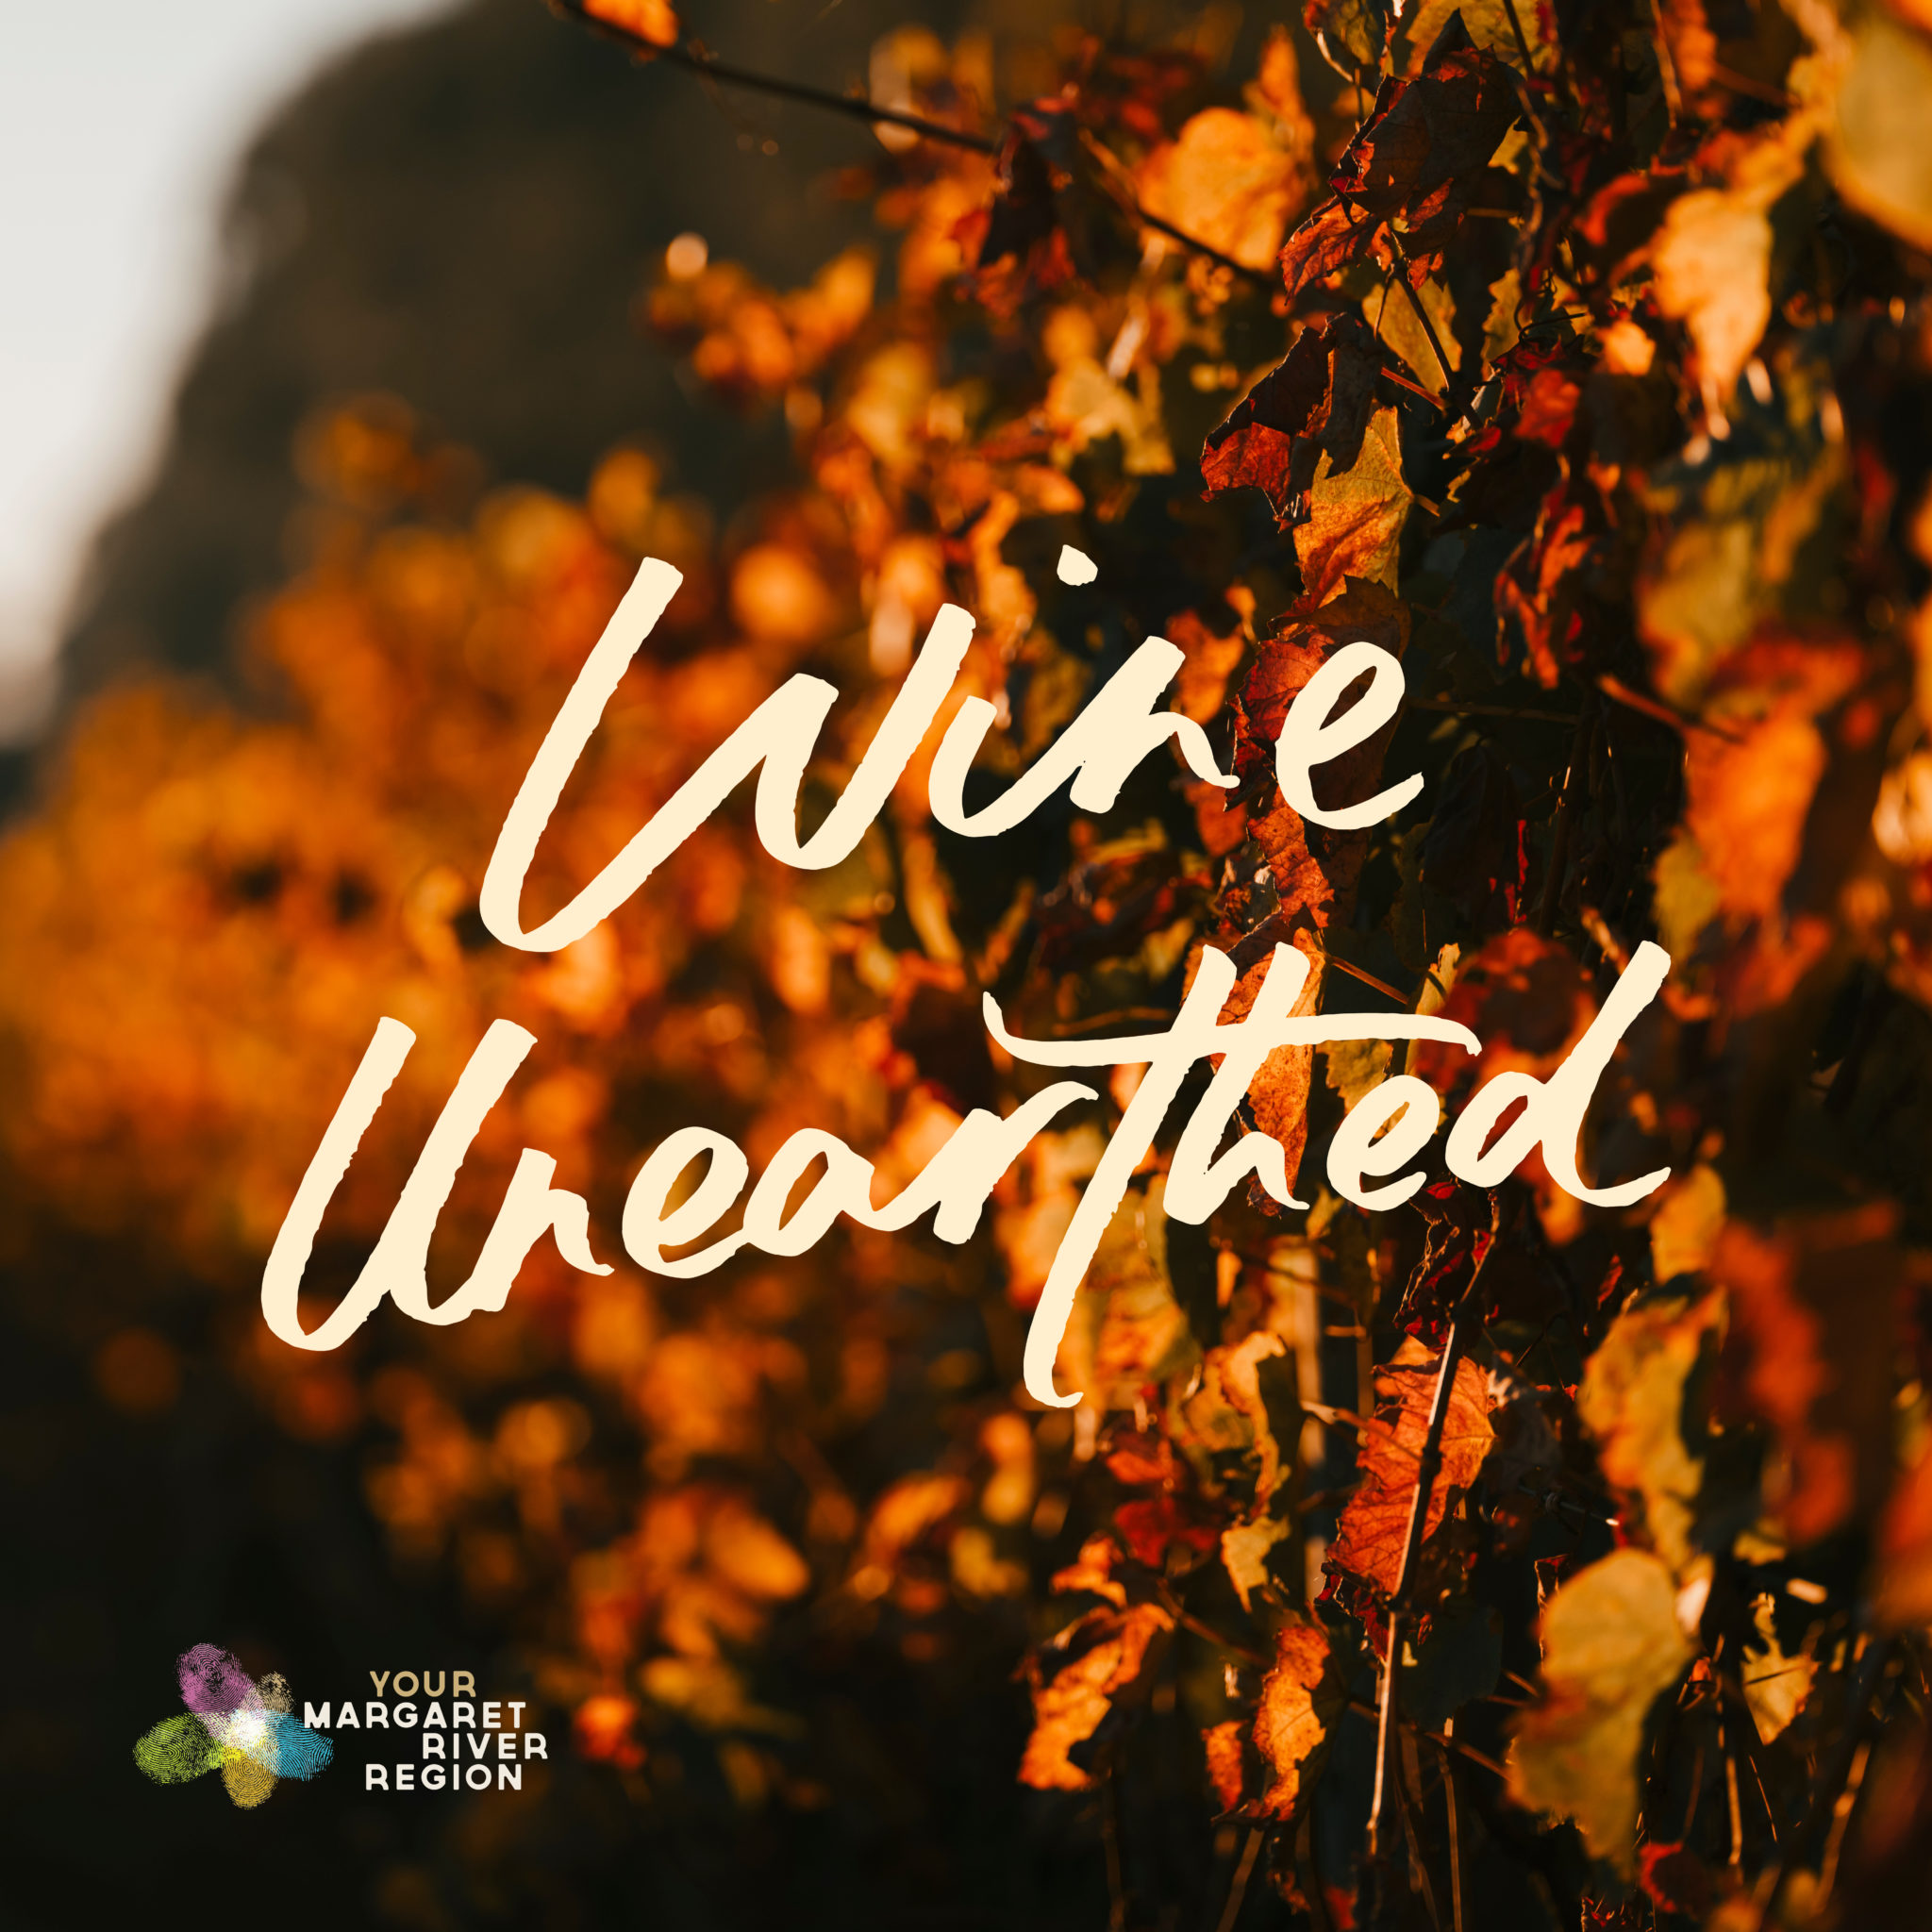 Margaret River Wine Region ‘Unearthed’ Through New Podcast Series